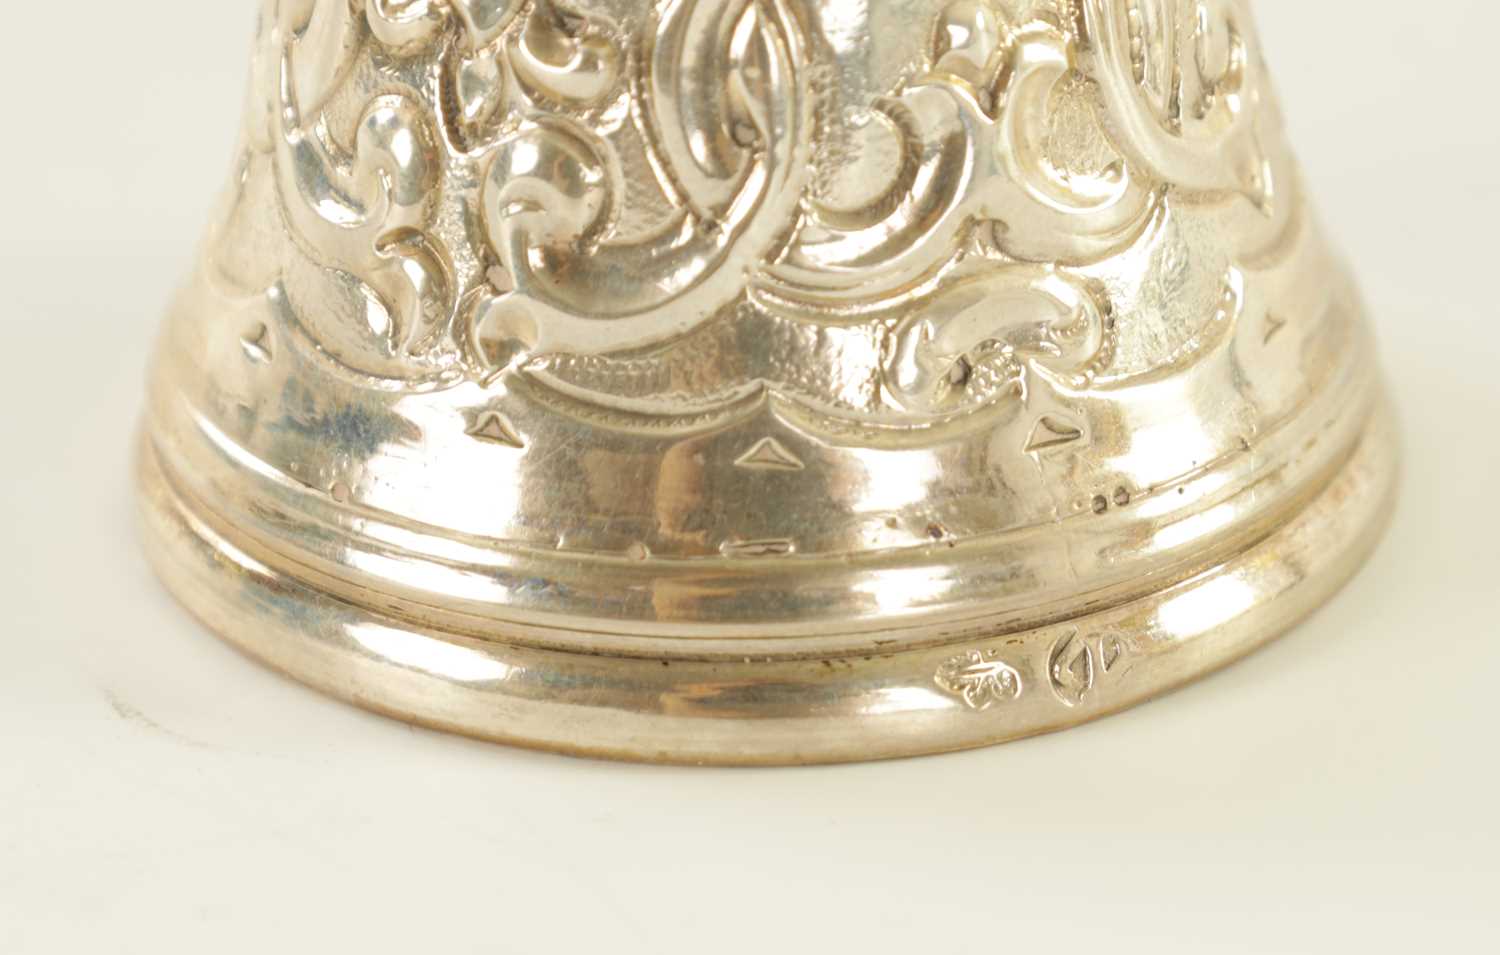 A LATE 19TH CENTURY DUTCH EMBOSSED MINIATURE BELL - Image 5 of 6